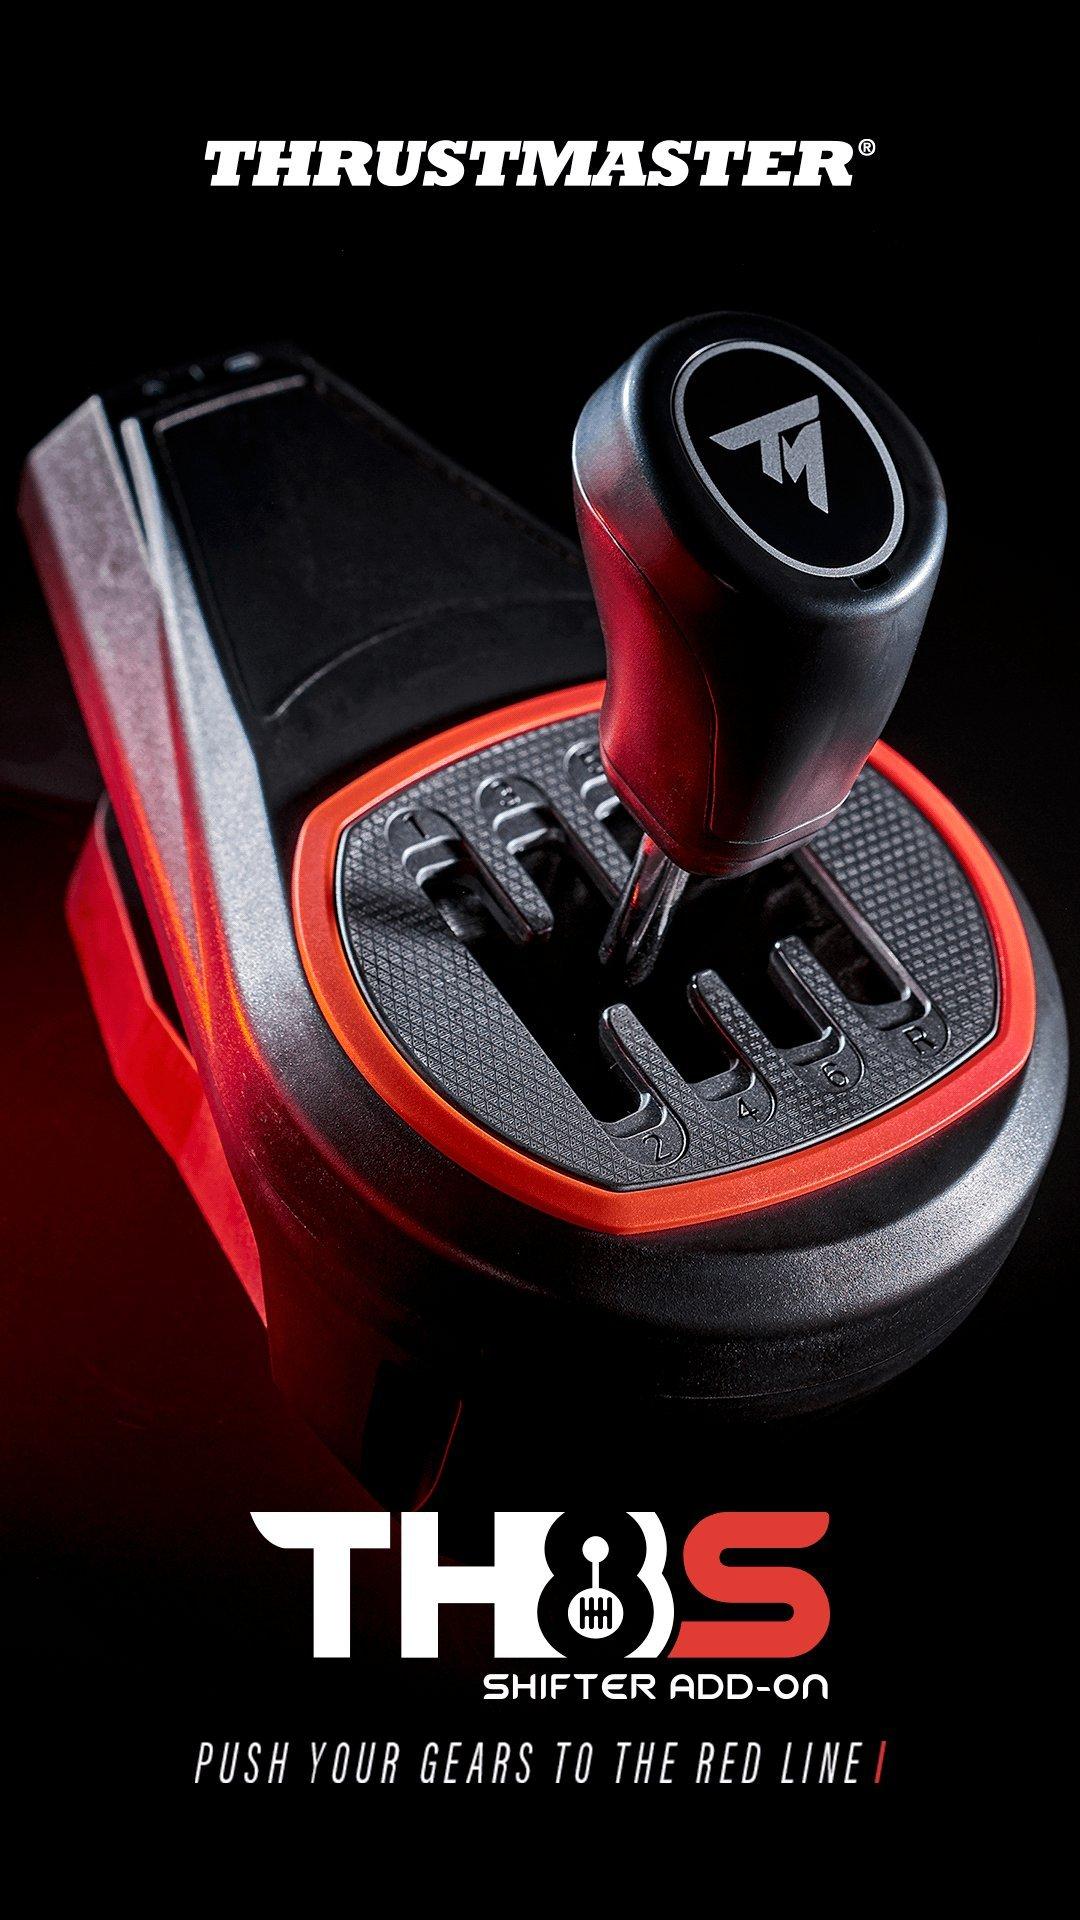 Thrustmaster TH8S Shifter [UNBOXING] Less than 1/2 the price of